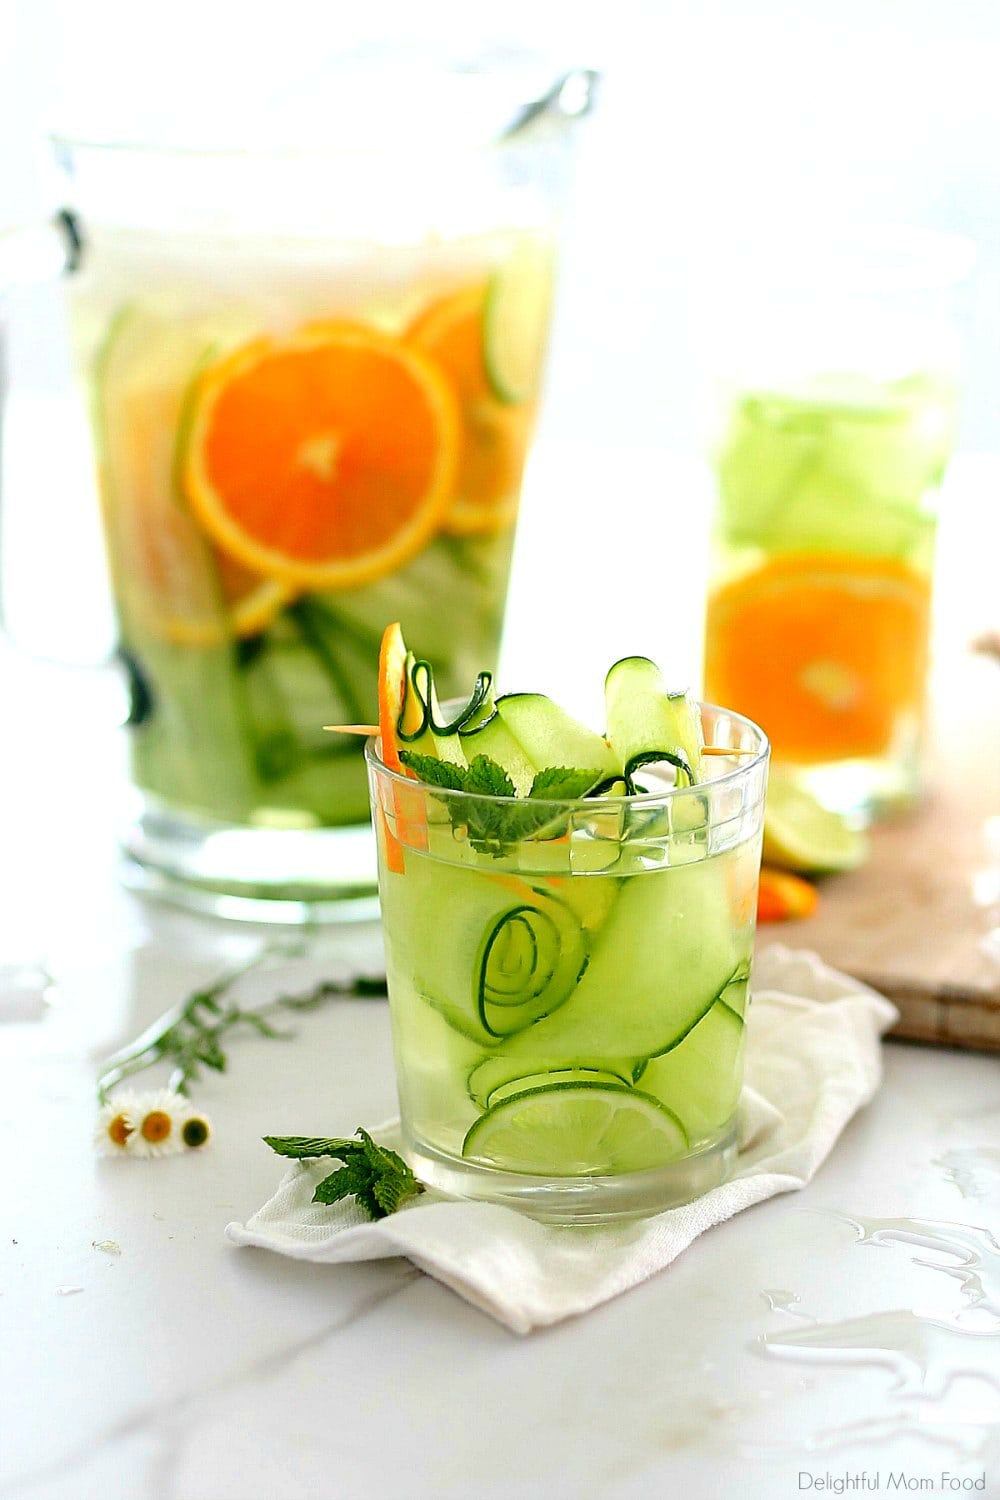 Enjoy this refreshing cucumber water recipe infused with fresh orange slices, mint and lime to increase hydration, absorption of immunity boosting vitamin C, and to achieve a vibrant complexion! It is easy to make and sip all day! #detox #water #recipe #cucumberwater #cucumberlimewater #orangecucumberwater #watercleanse #waterflush #cucumber #beverage #drink | Recipe at Delightful Mom Food